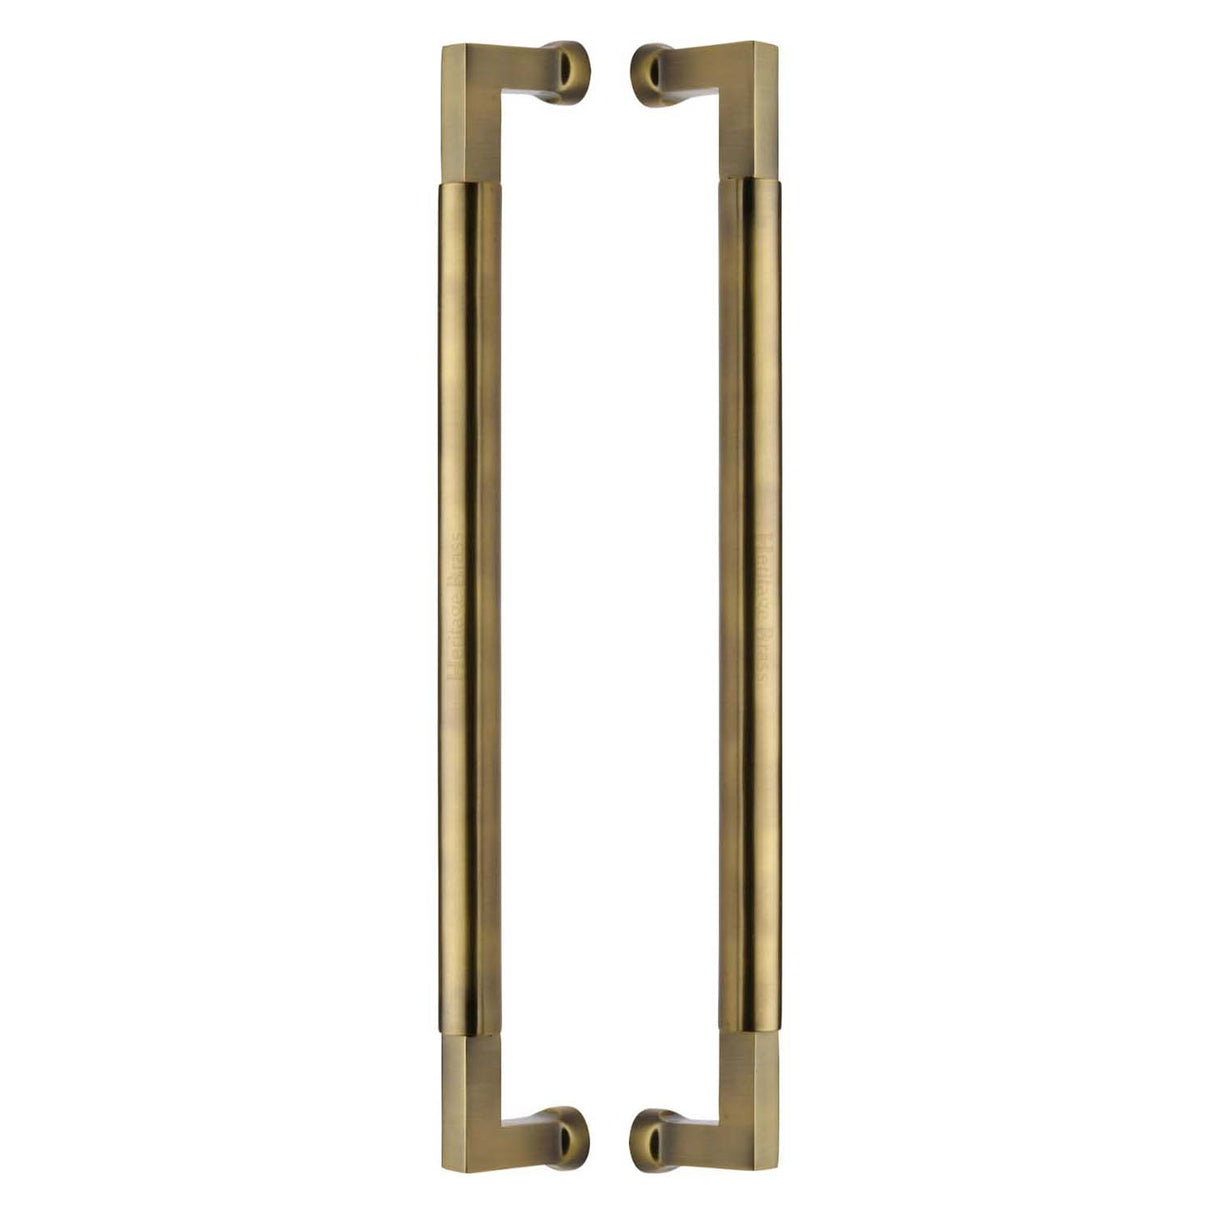 This is an image of a Heritage Brass - Door Pull Handle Bauhaus Design 483mm Antique Brass Finish, btb1312-483-at that is available to order from Trade Door Handles in Kendal.